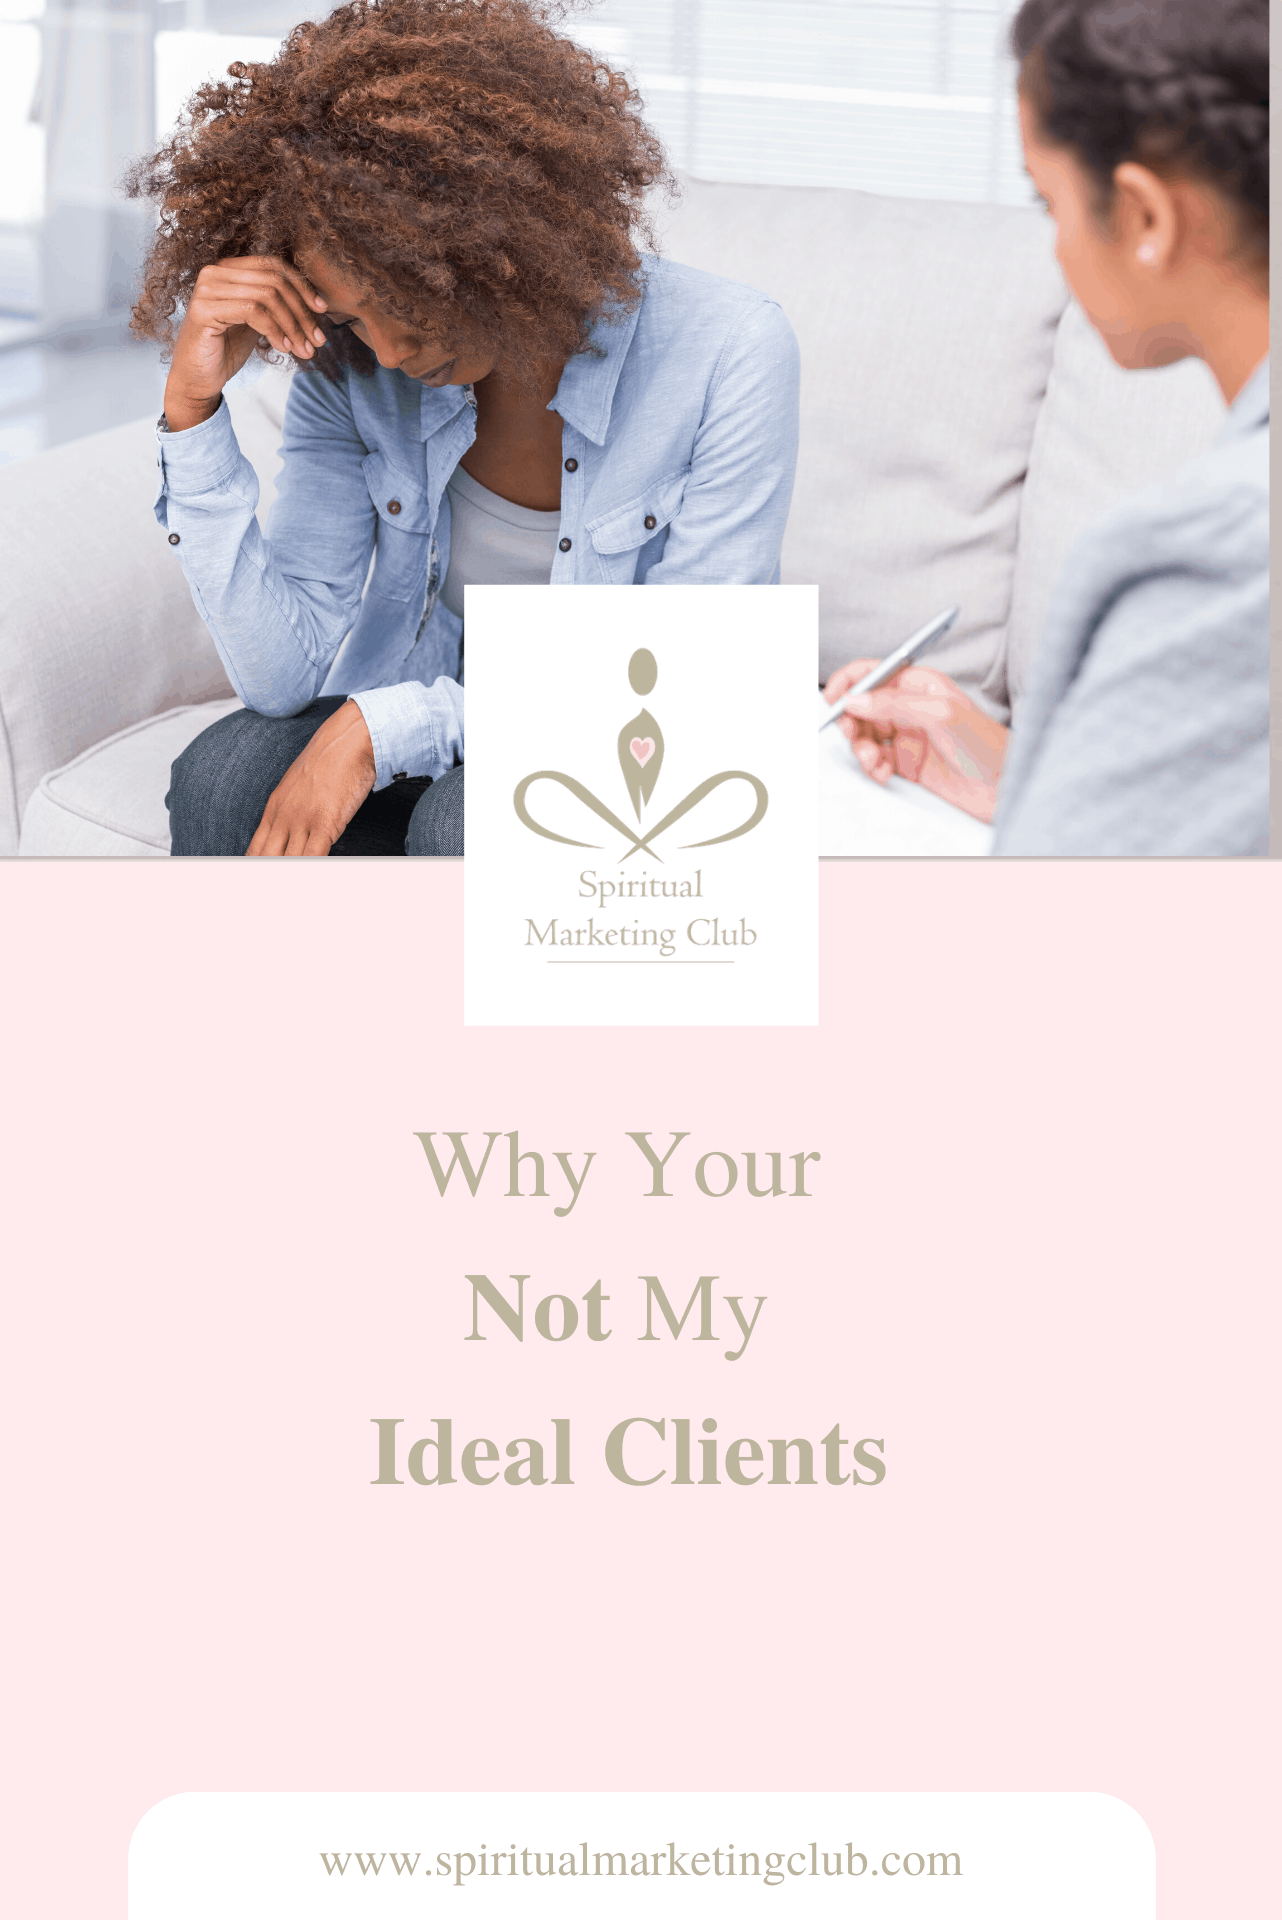 My Ideal Clients